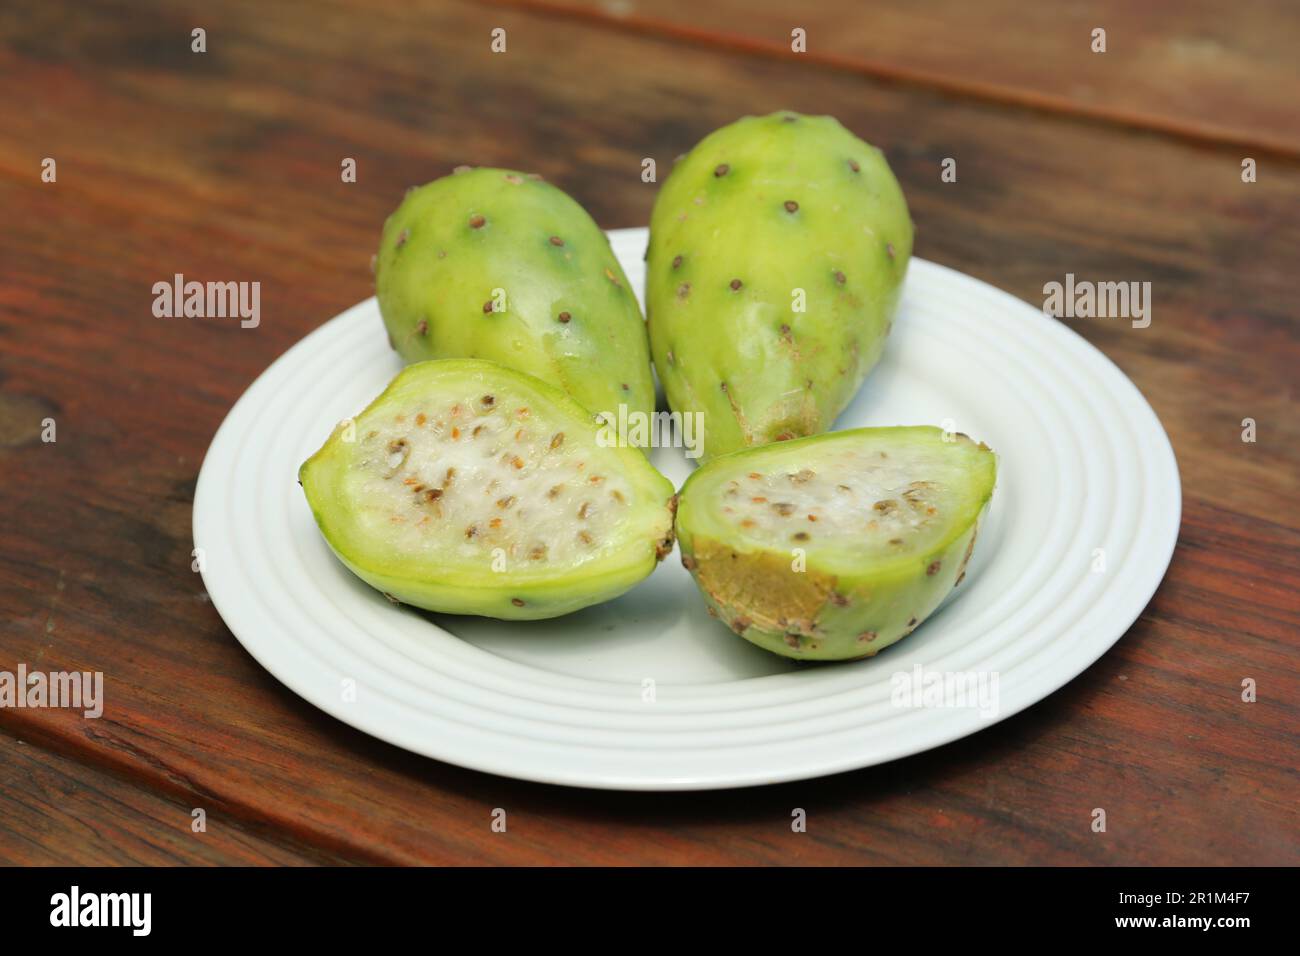 Tasty prickly pear fruits on wooden table Stock Photo